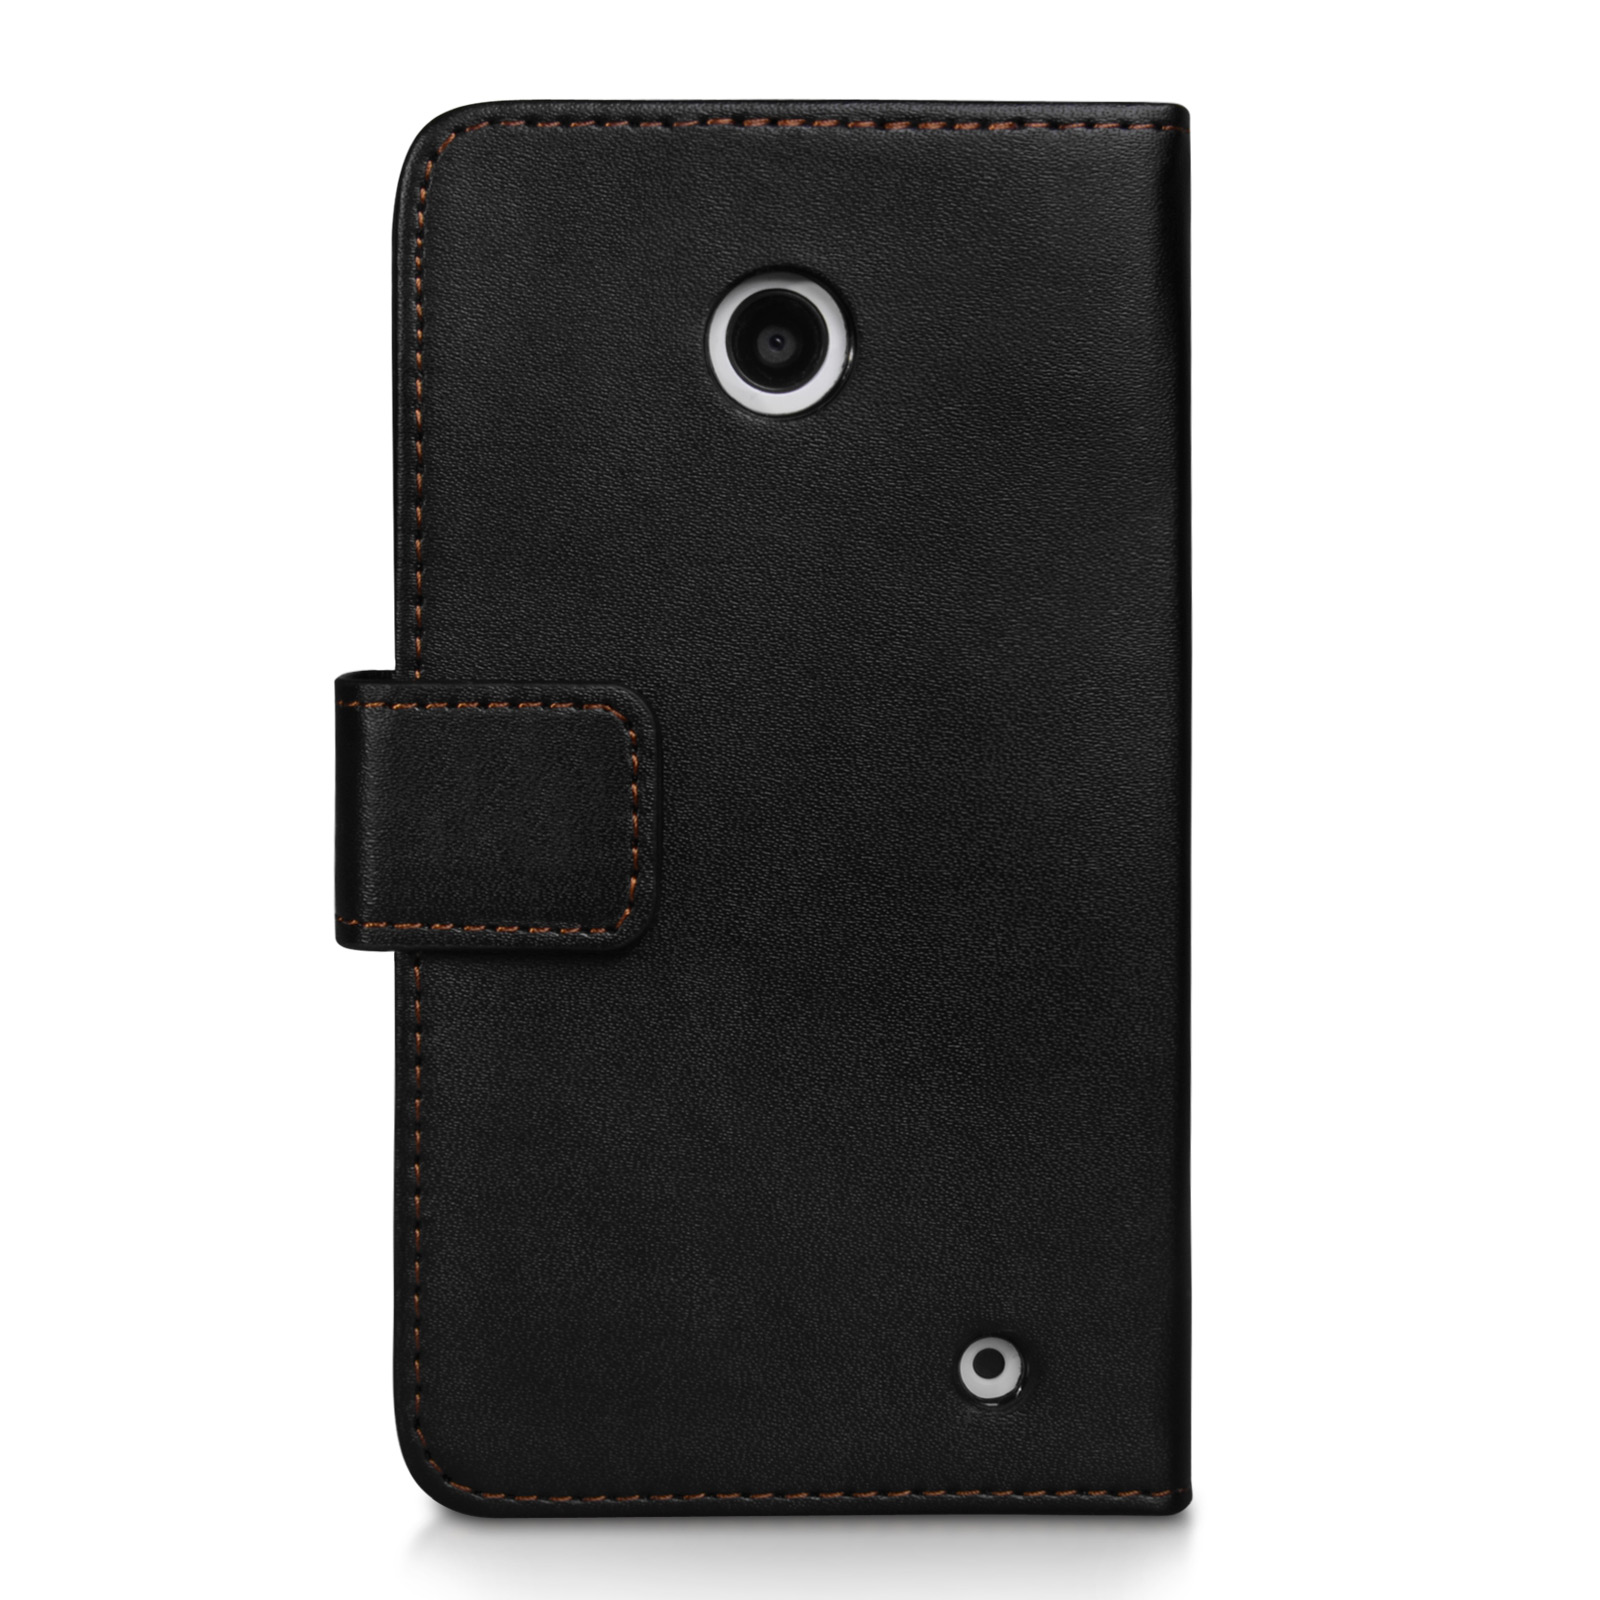 YouSave Accessories Nokia Lumia 630 Leather-Effect Wallet Case - Black